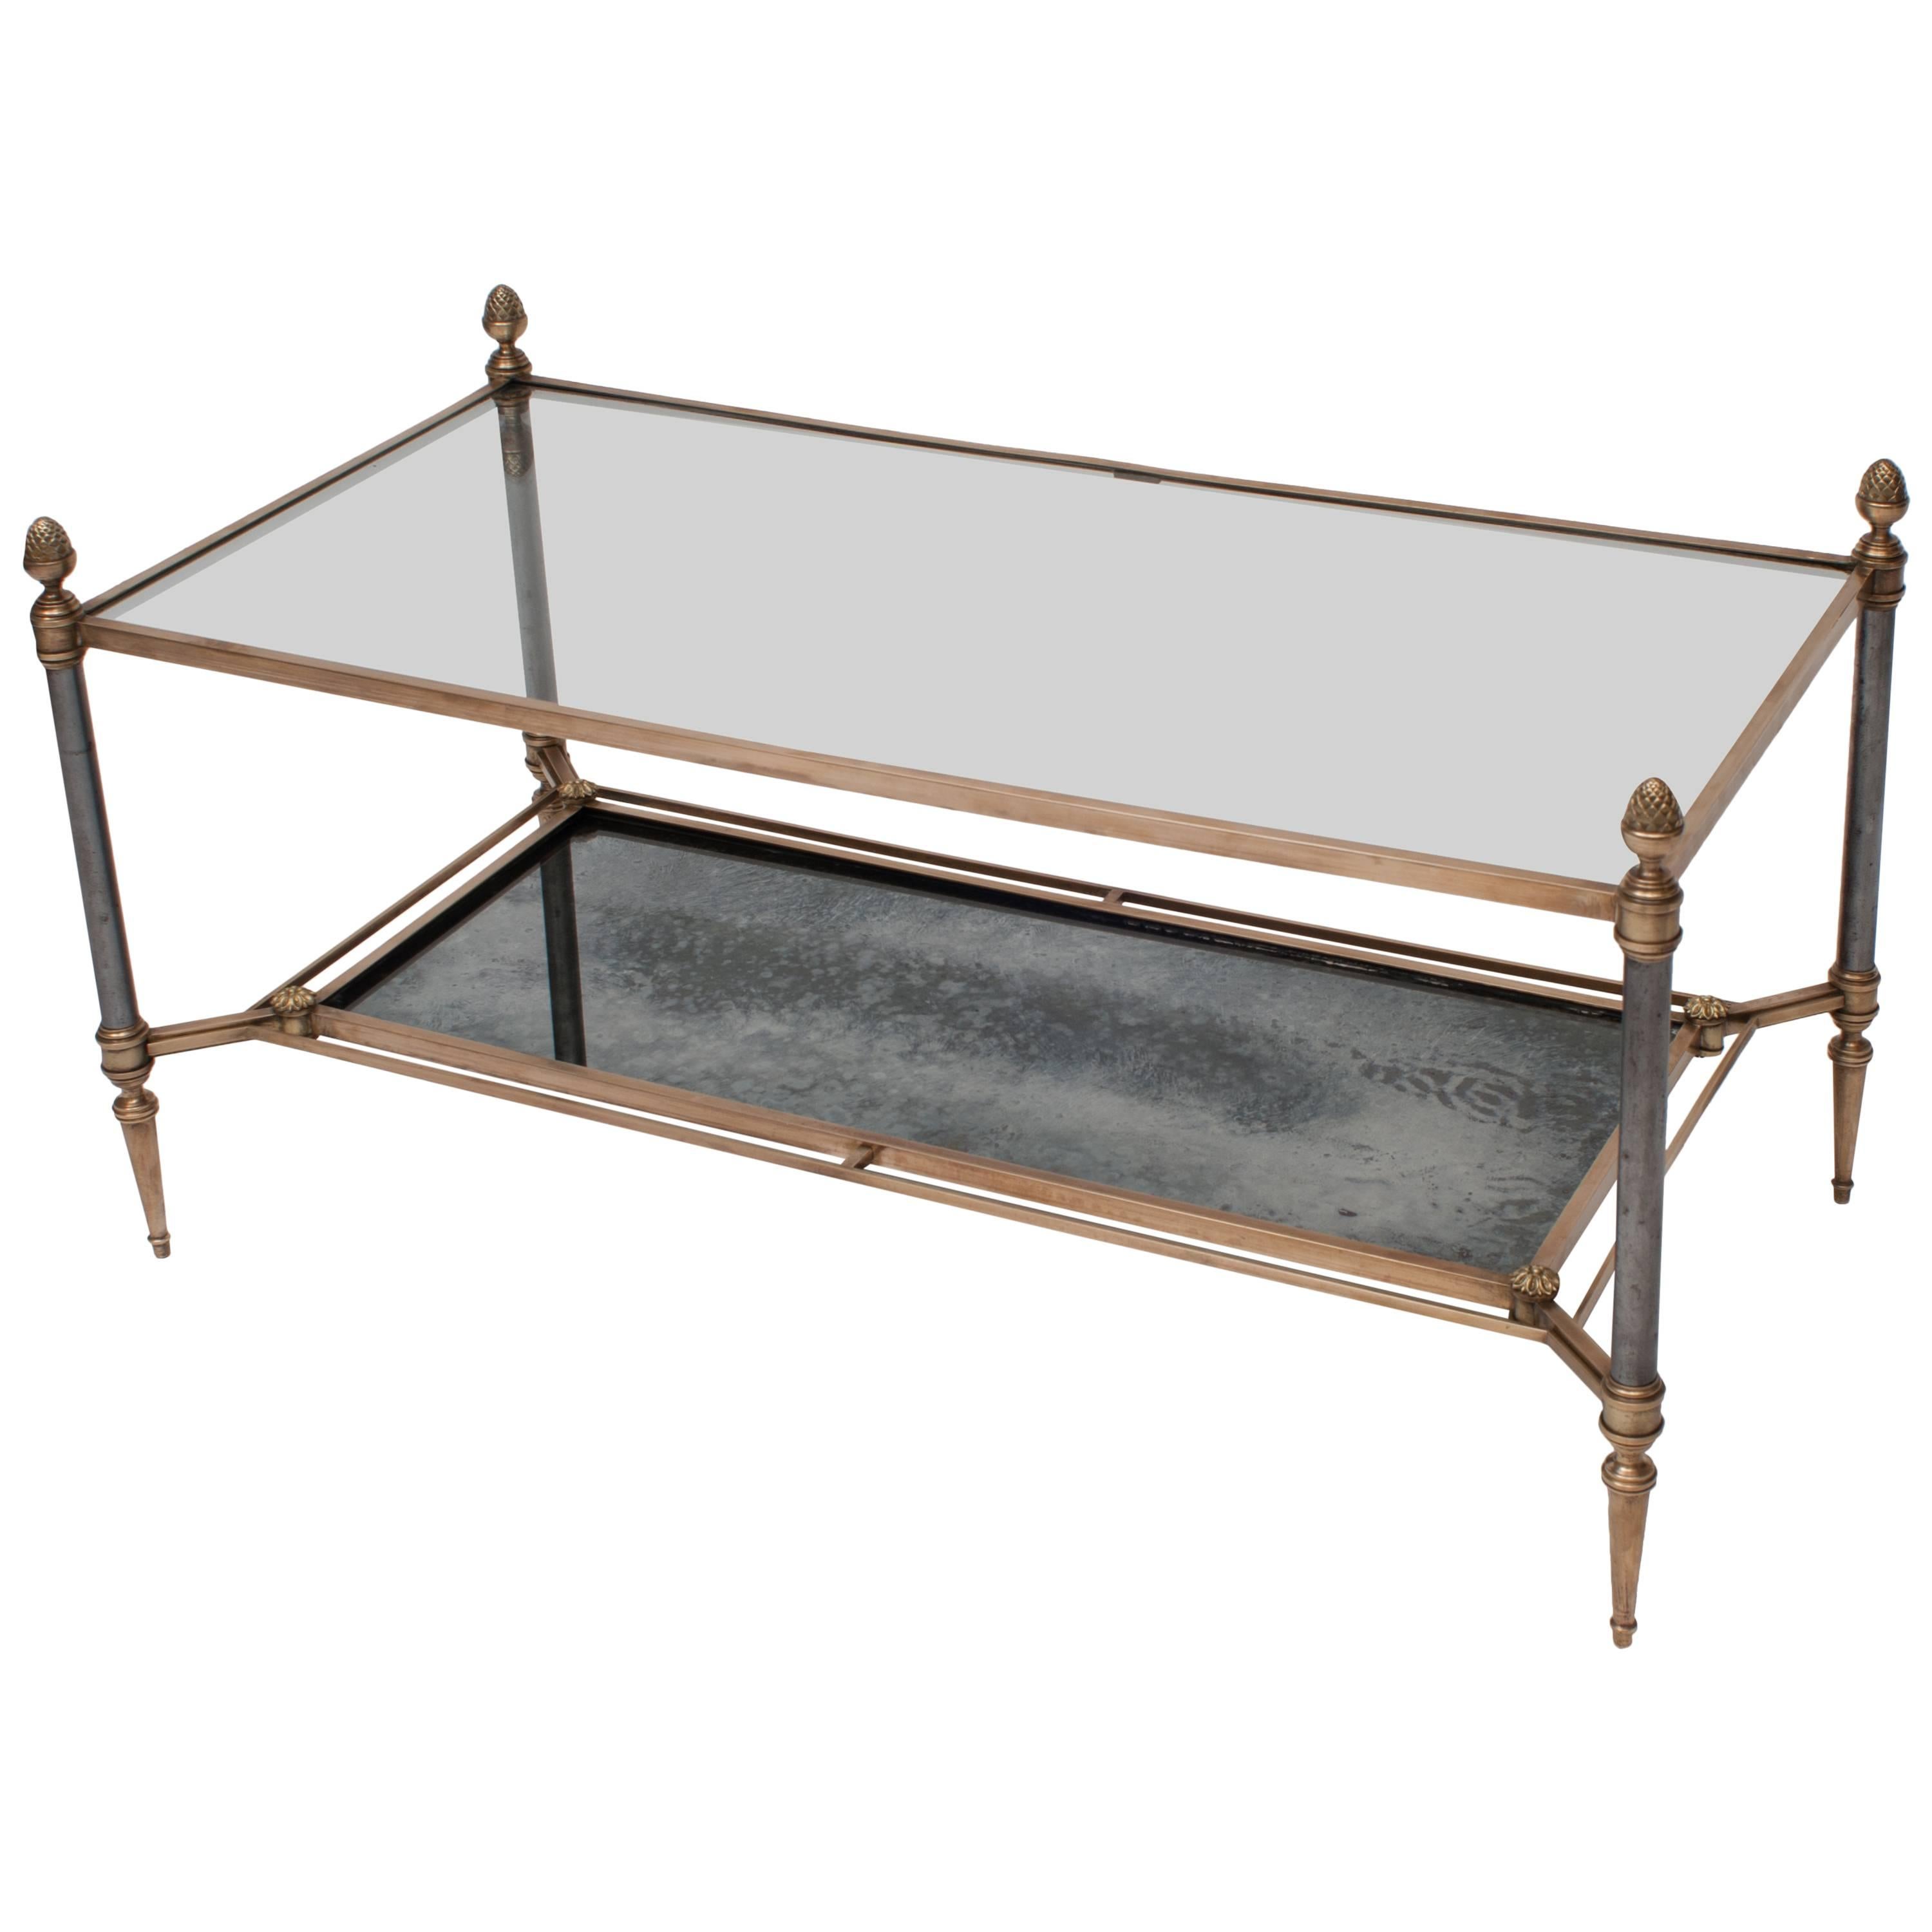 Jansen Neoclassic Style Coffee Table with Aged Mirrored Lower Shelf